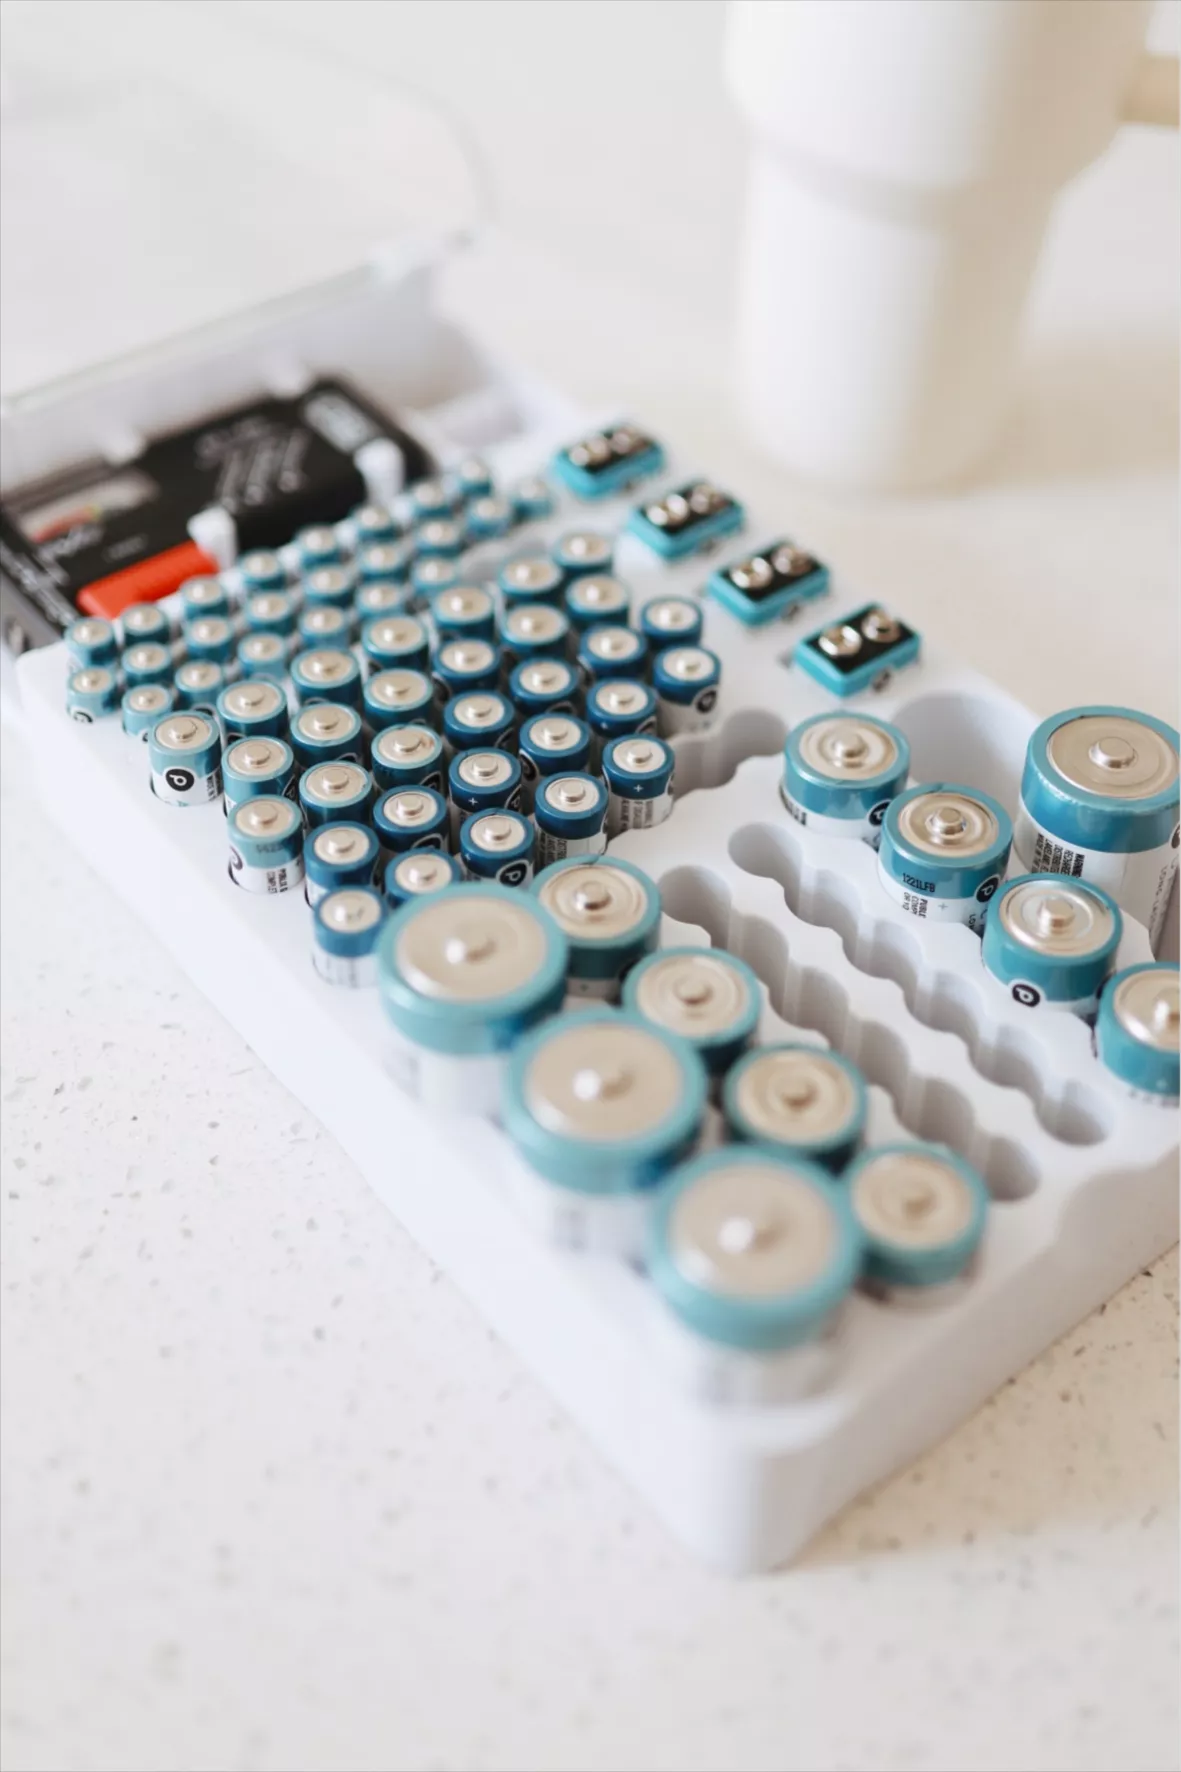 The Battery Organizer and Tester with Cover Battery Storage